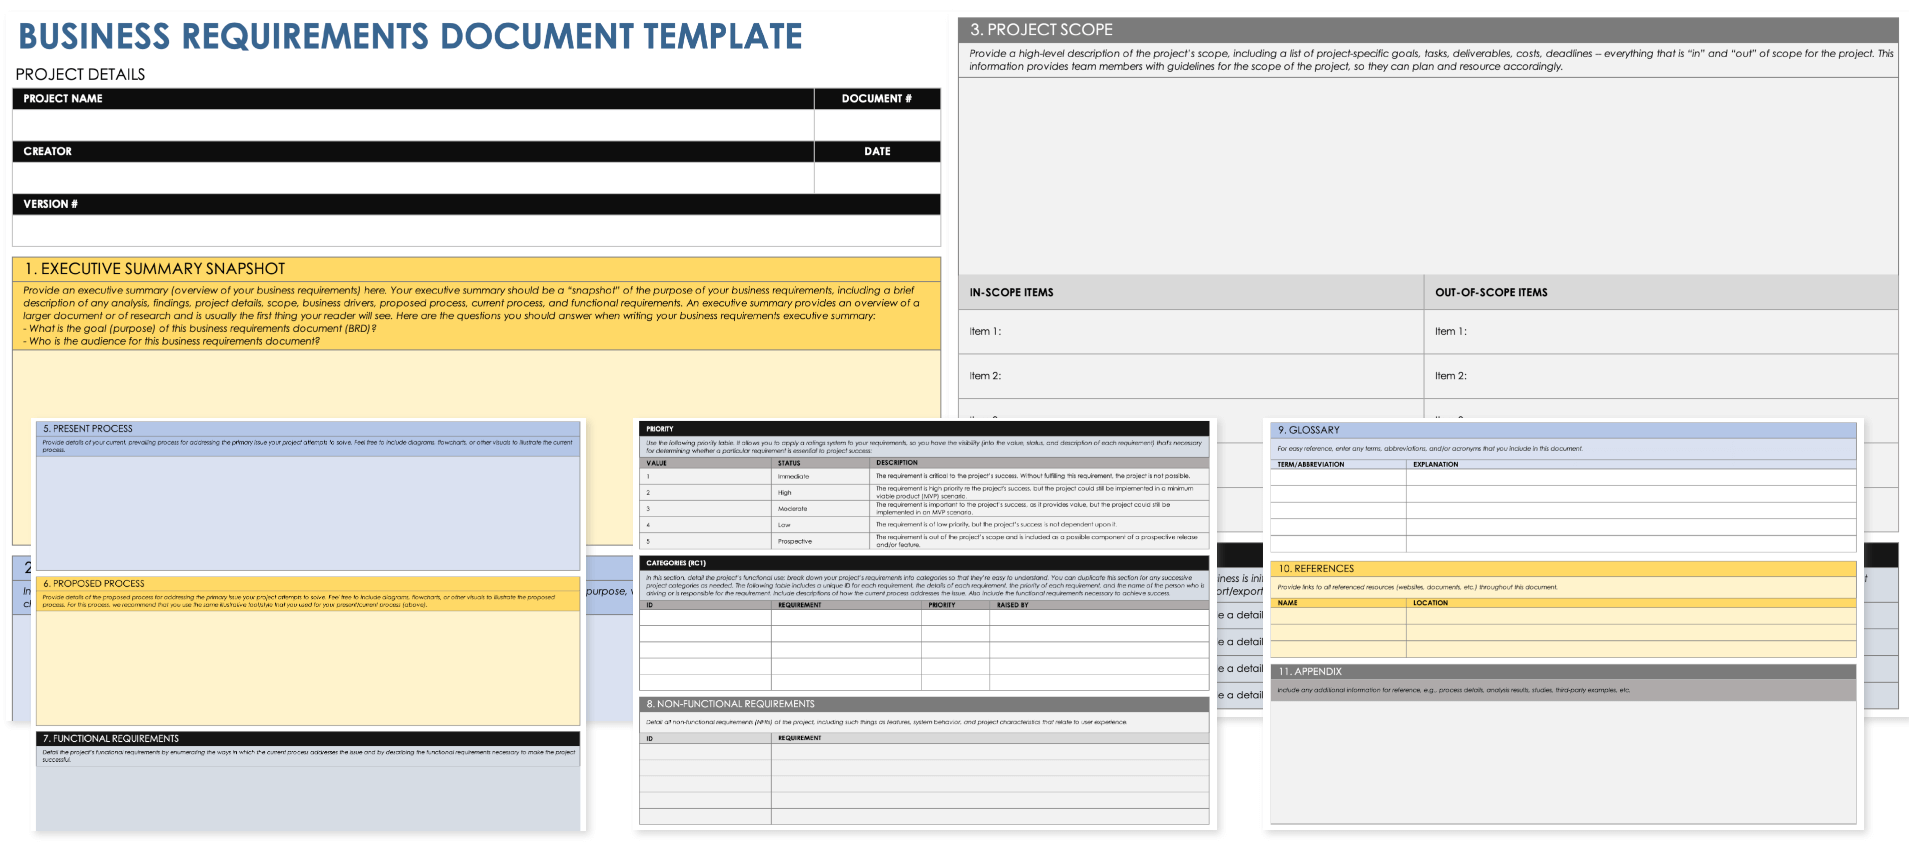 Business Requirements Documents Template